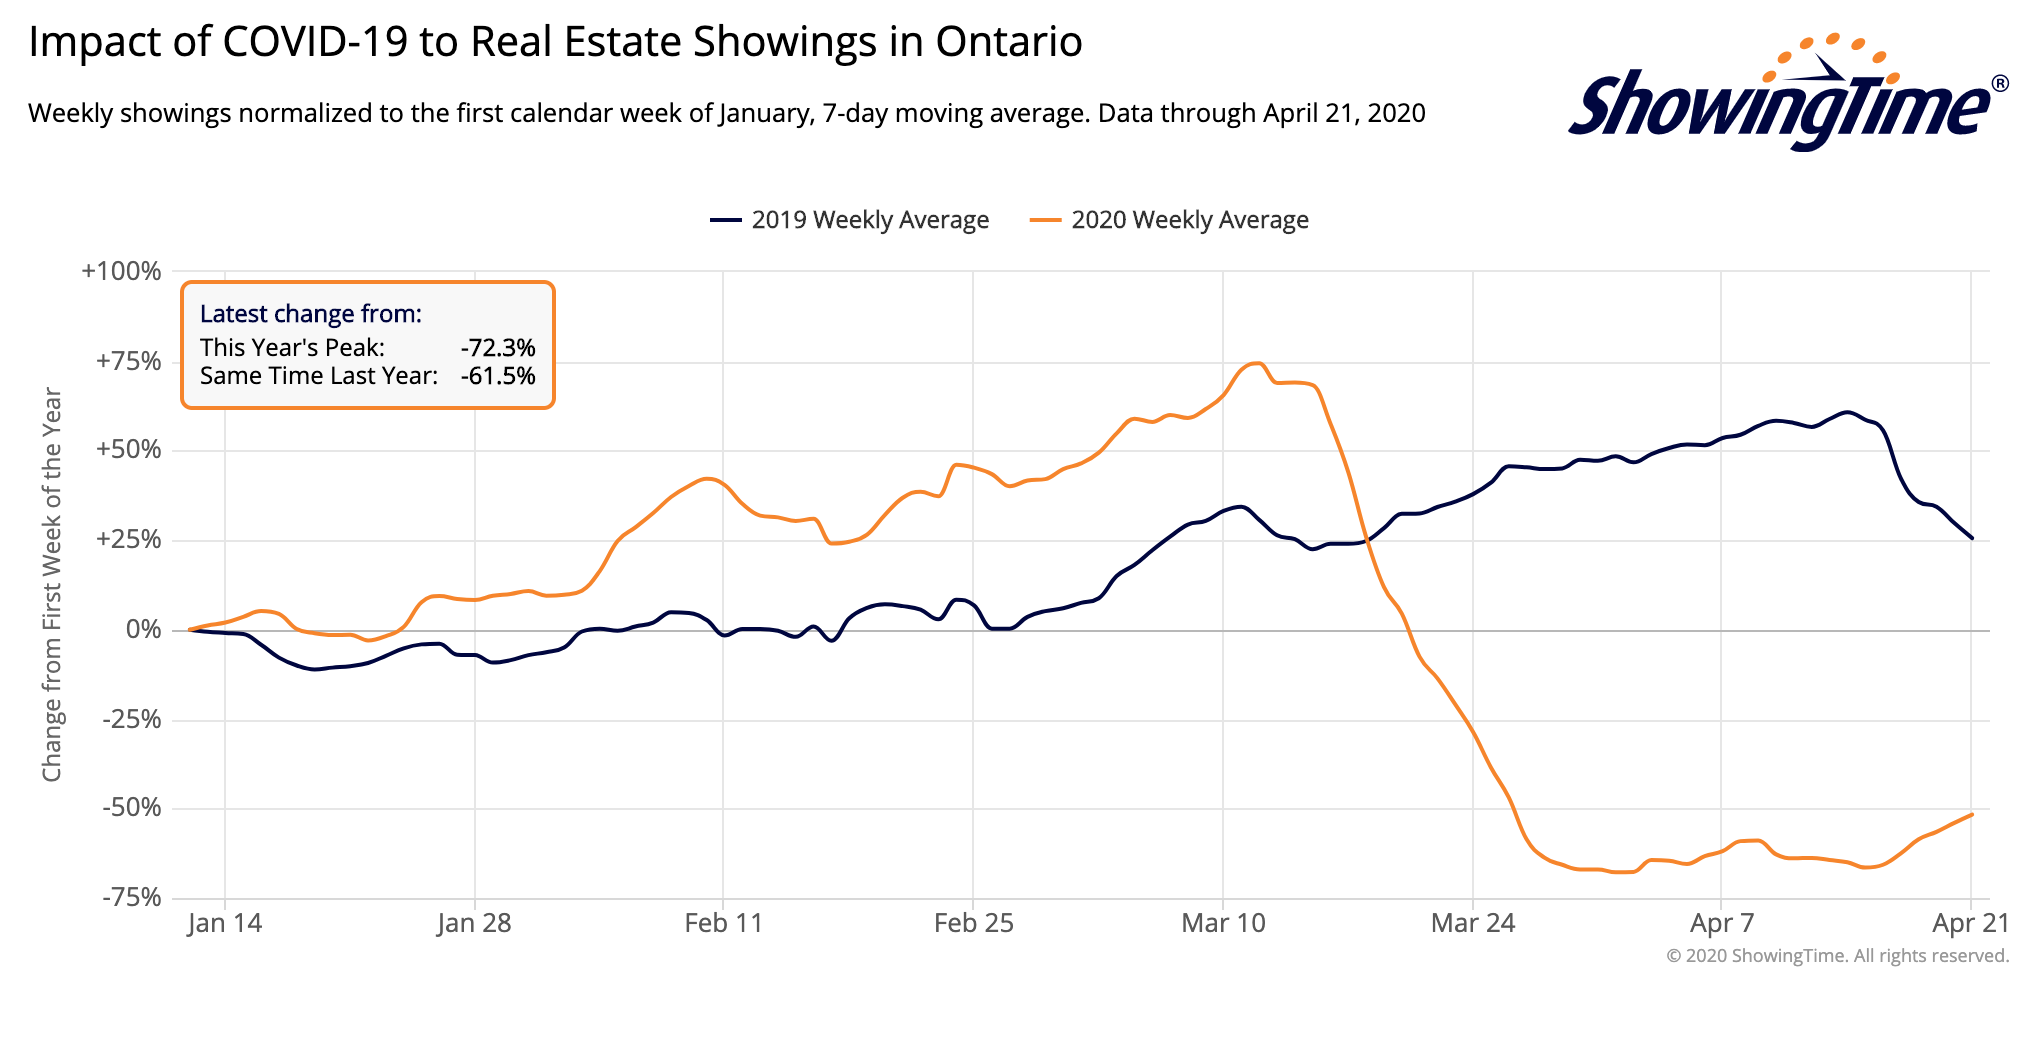 Impact of Covid-19 Real Estate Showings in Ontario